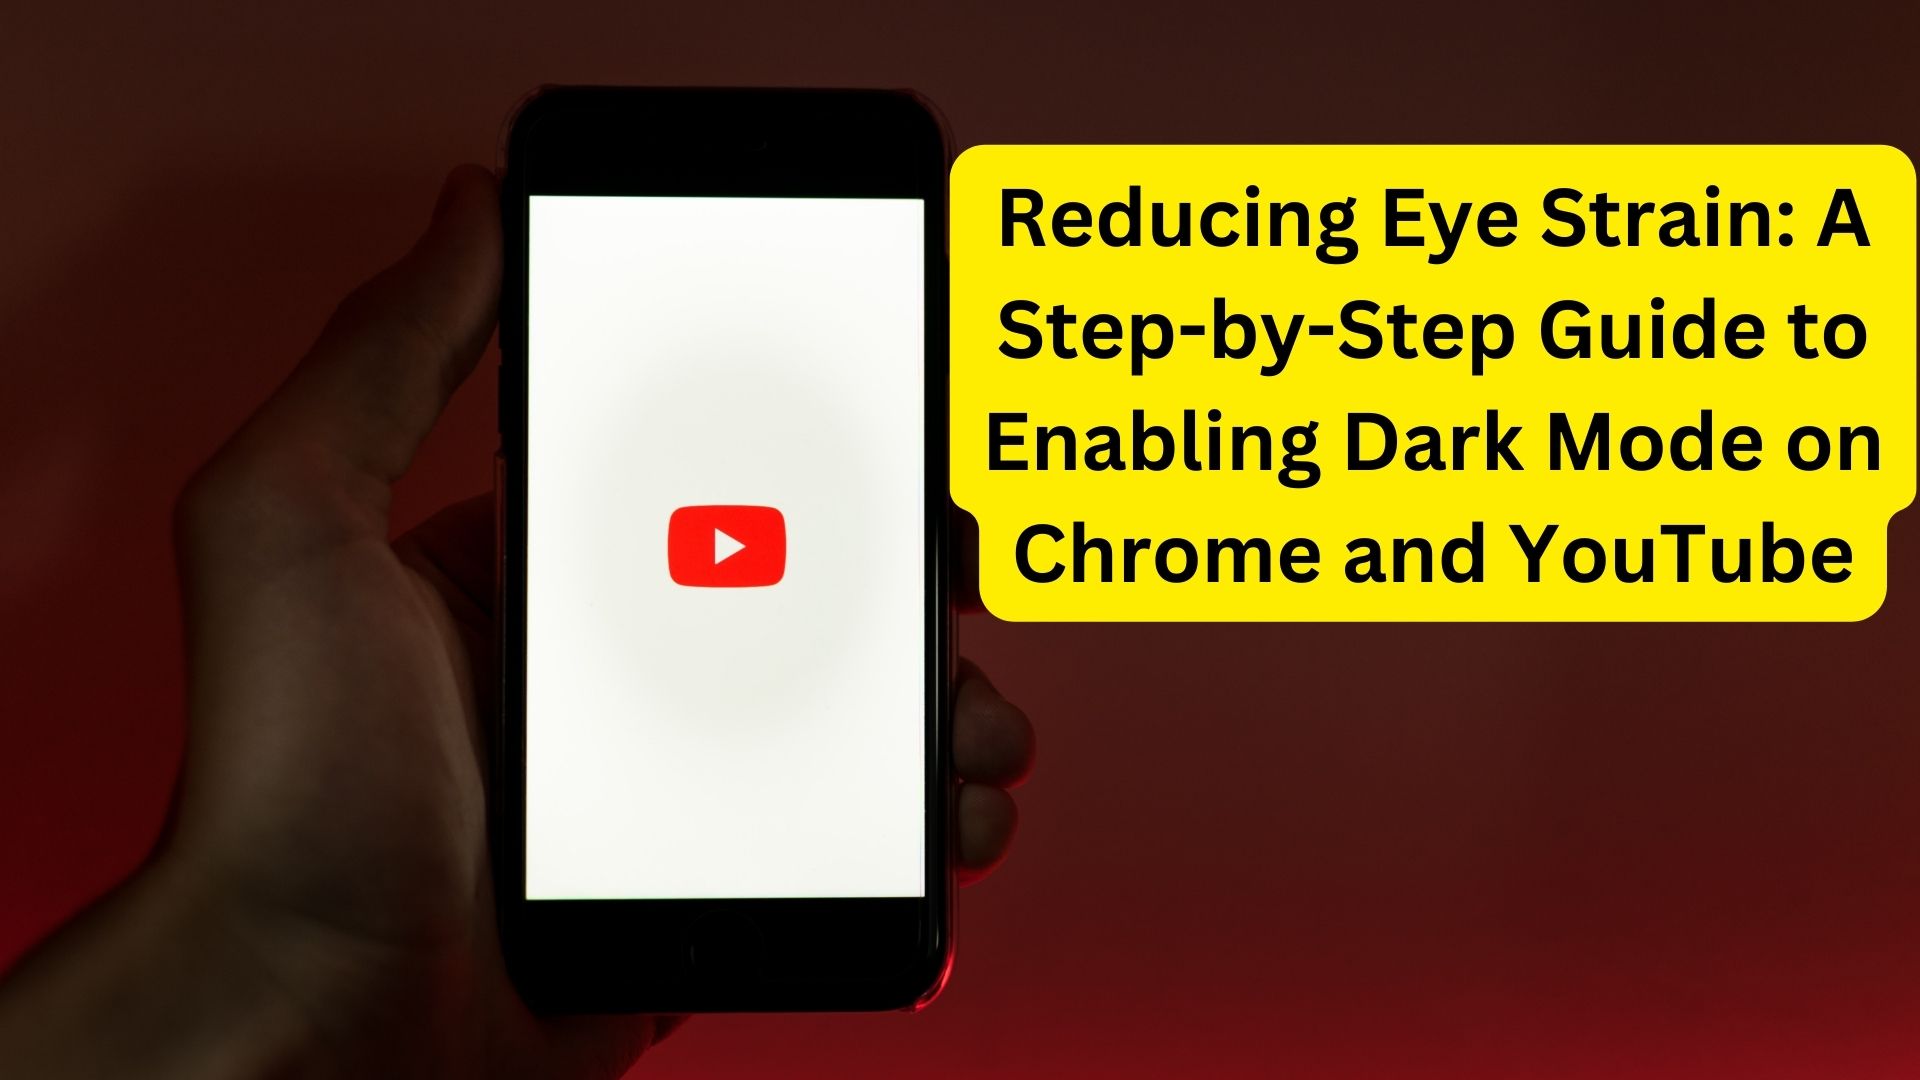 Reducing Eye Strain: A Step-by-Step Guide to Enabling Dark Mode on Chrome and YouTube